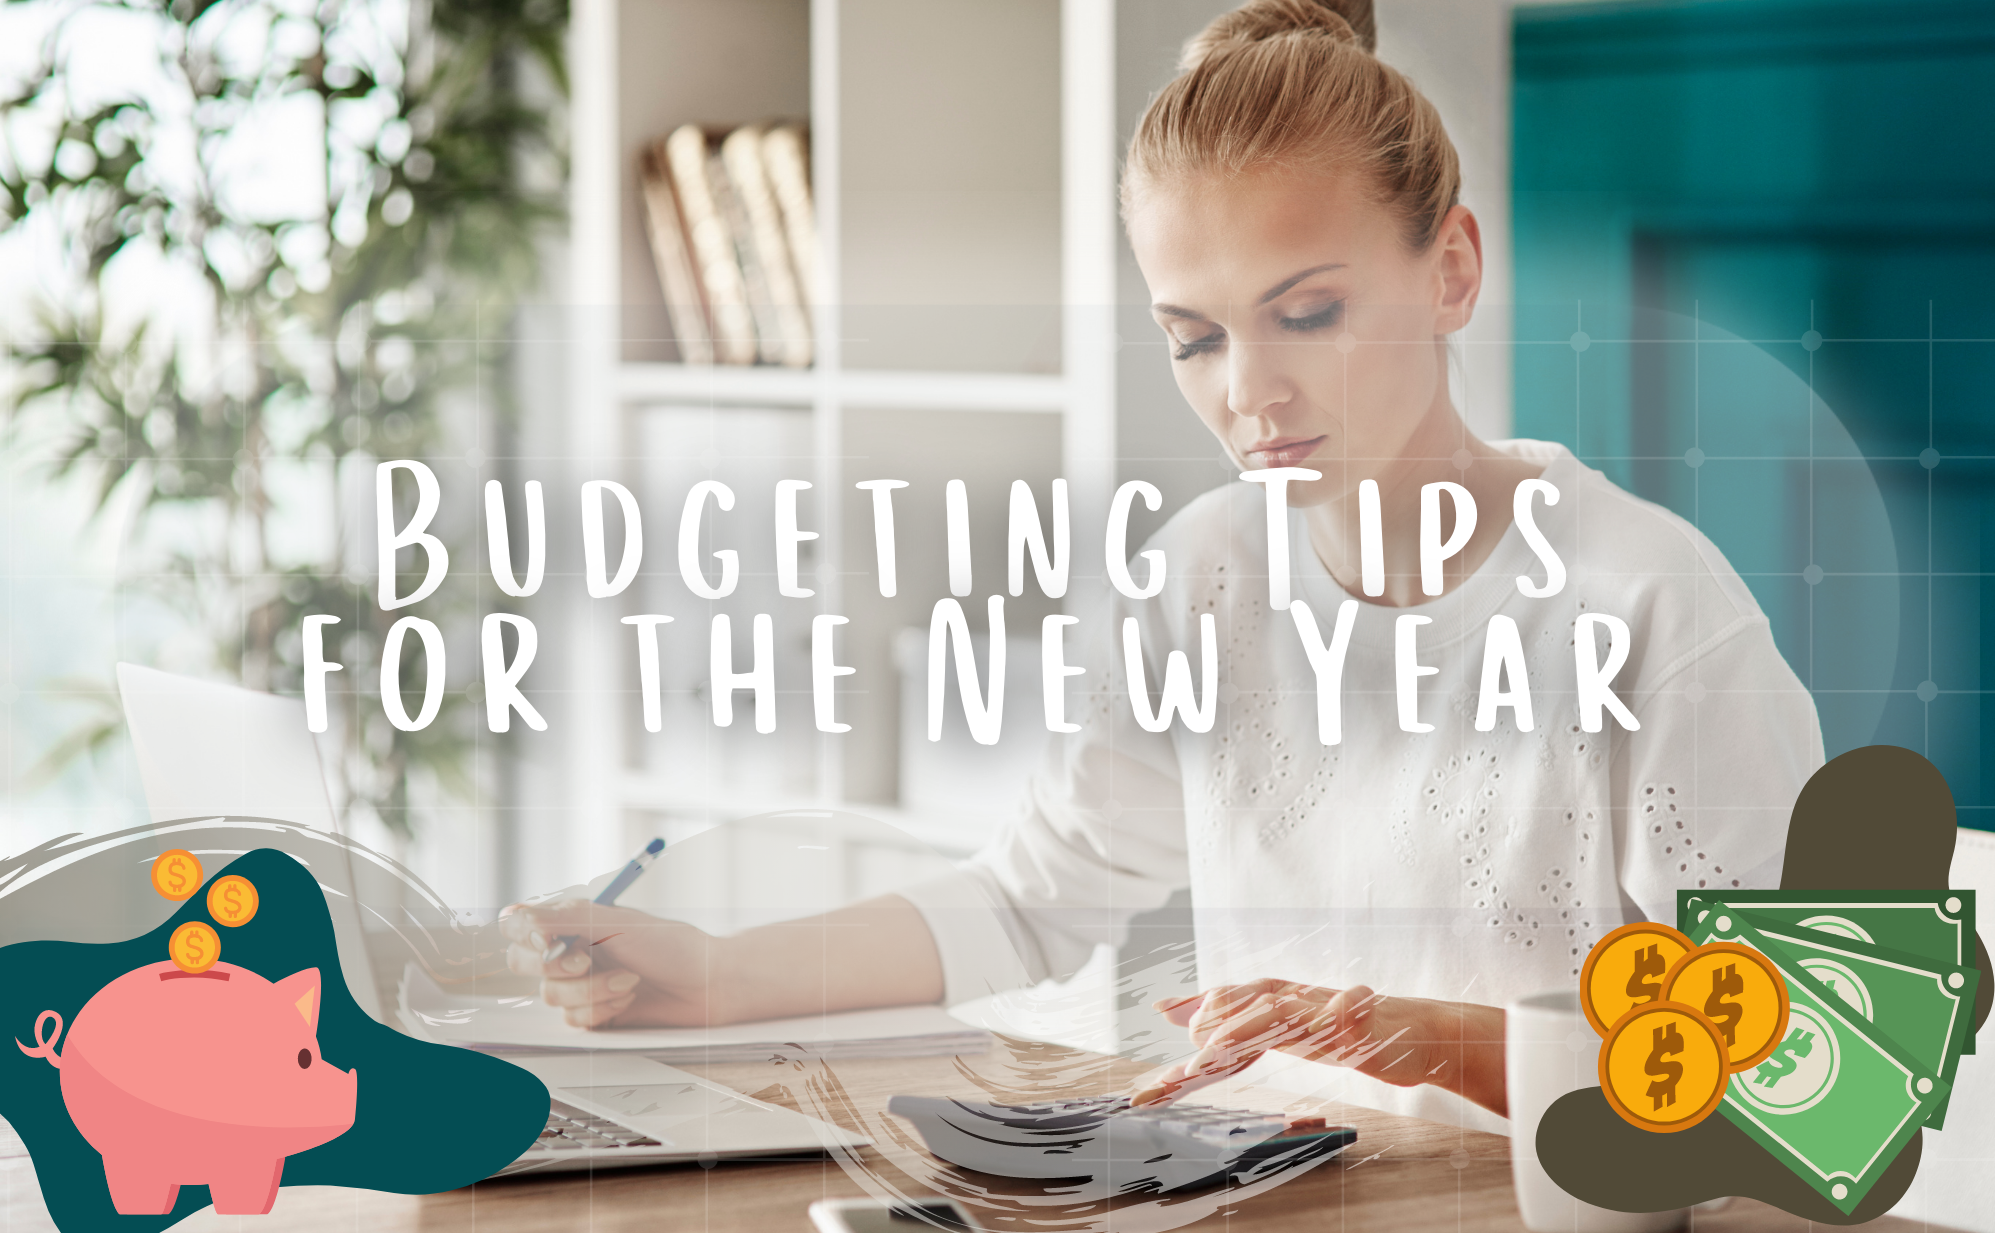 Budgeting Tips for the New Year